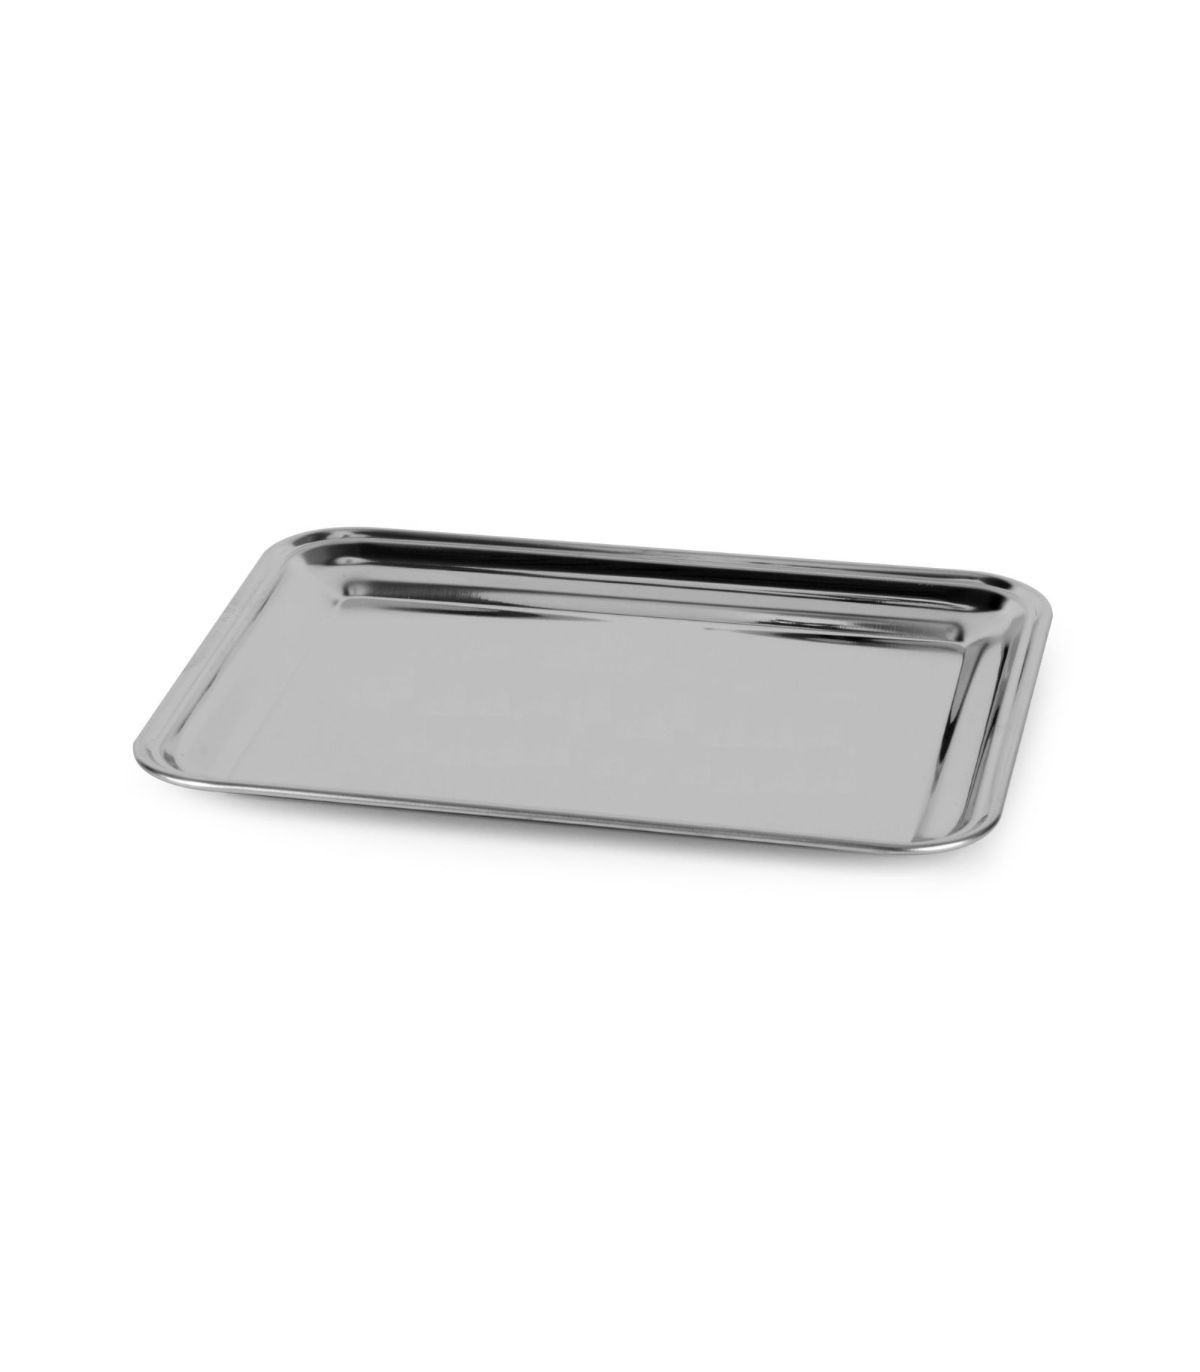 Caterer's Corner Red Plastic Serving Trays, 13x8-in.